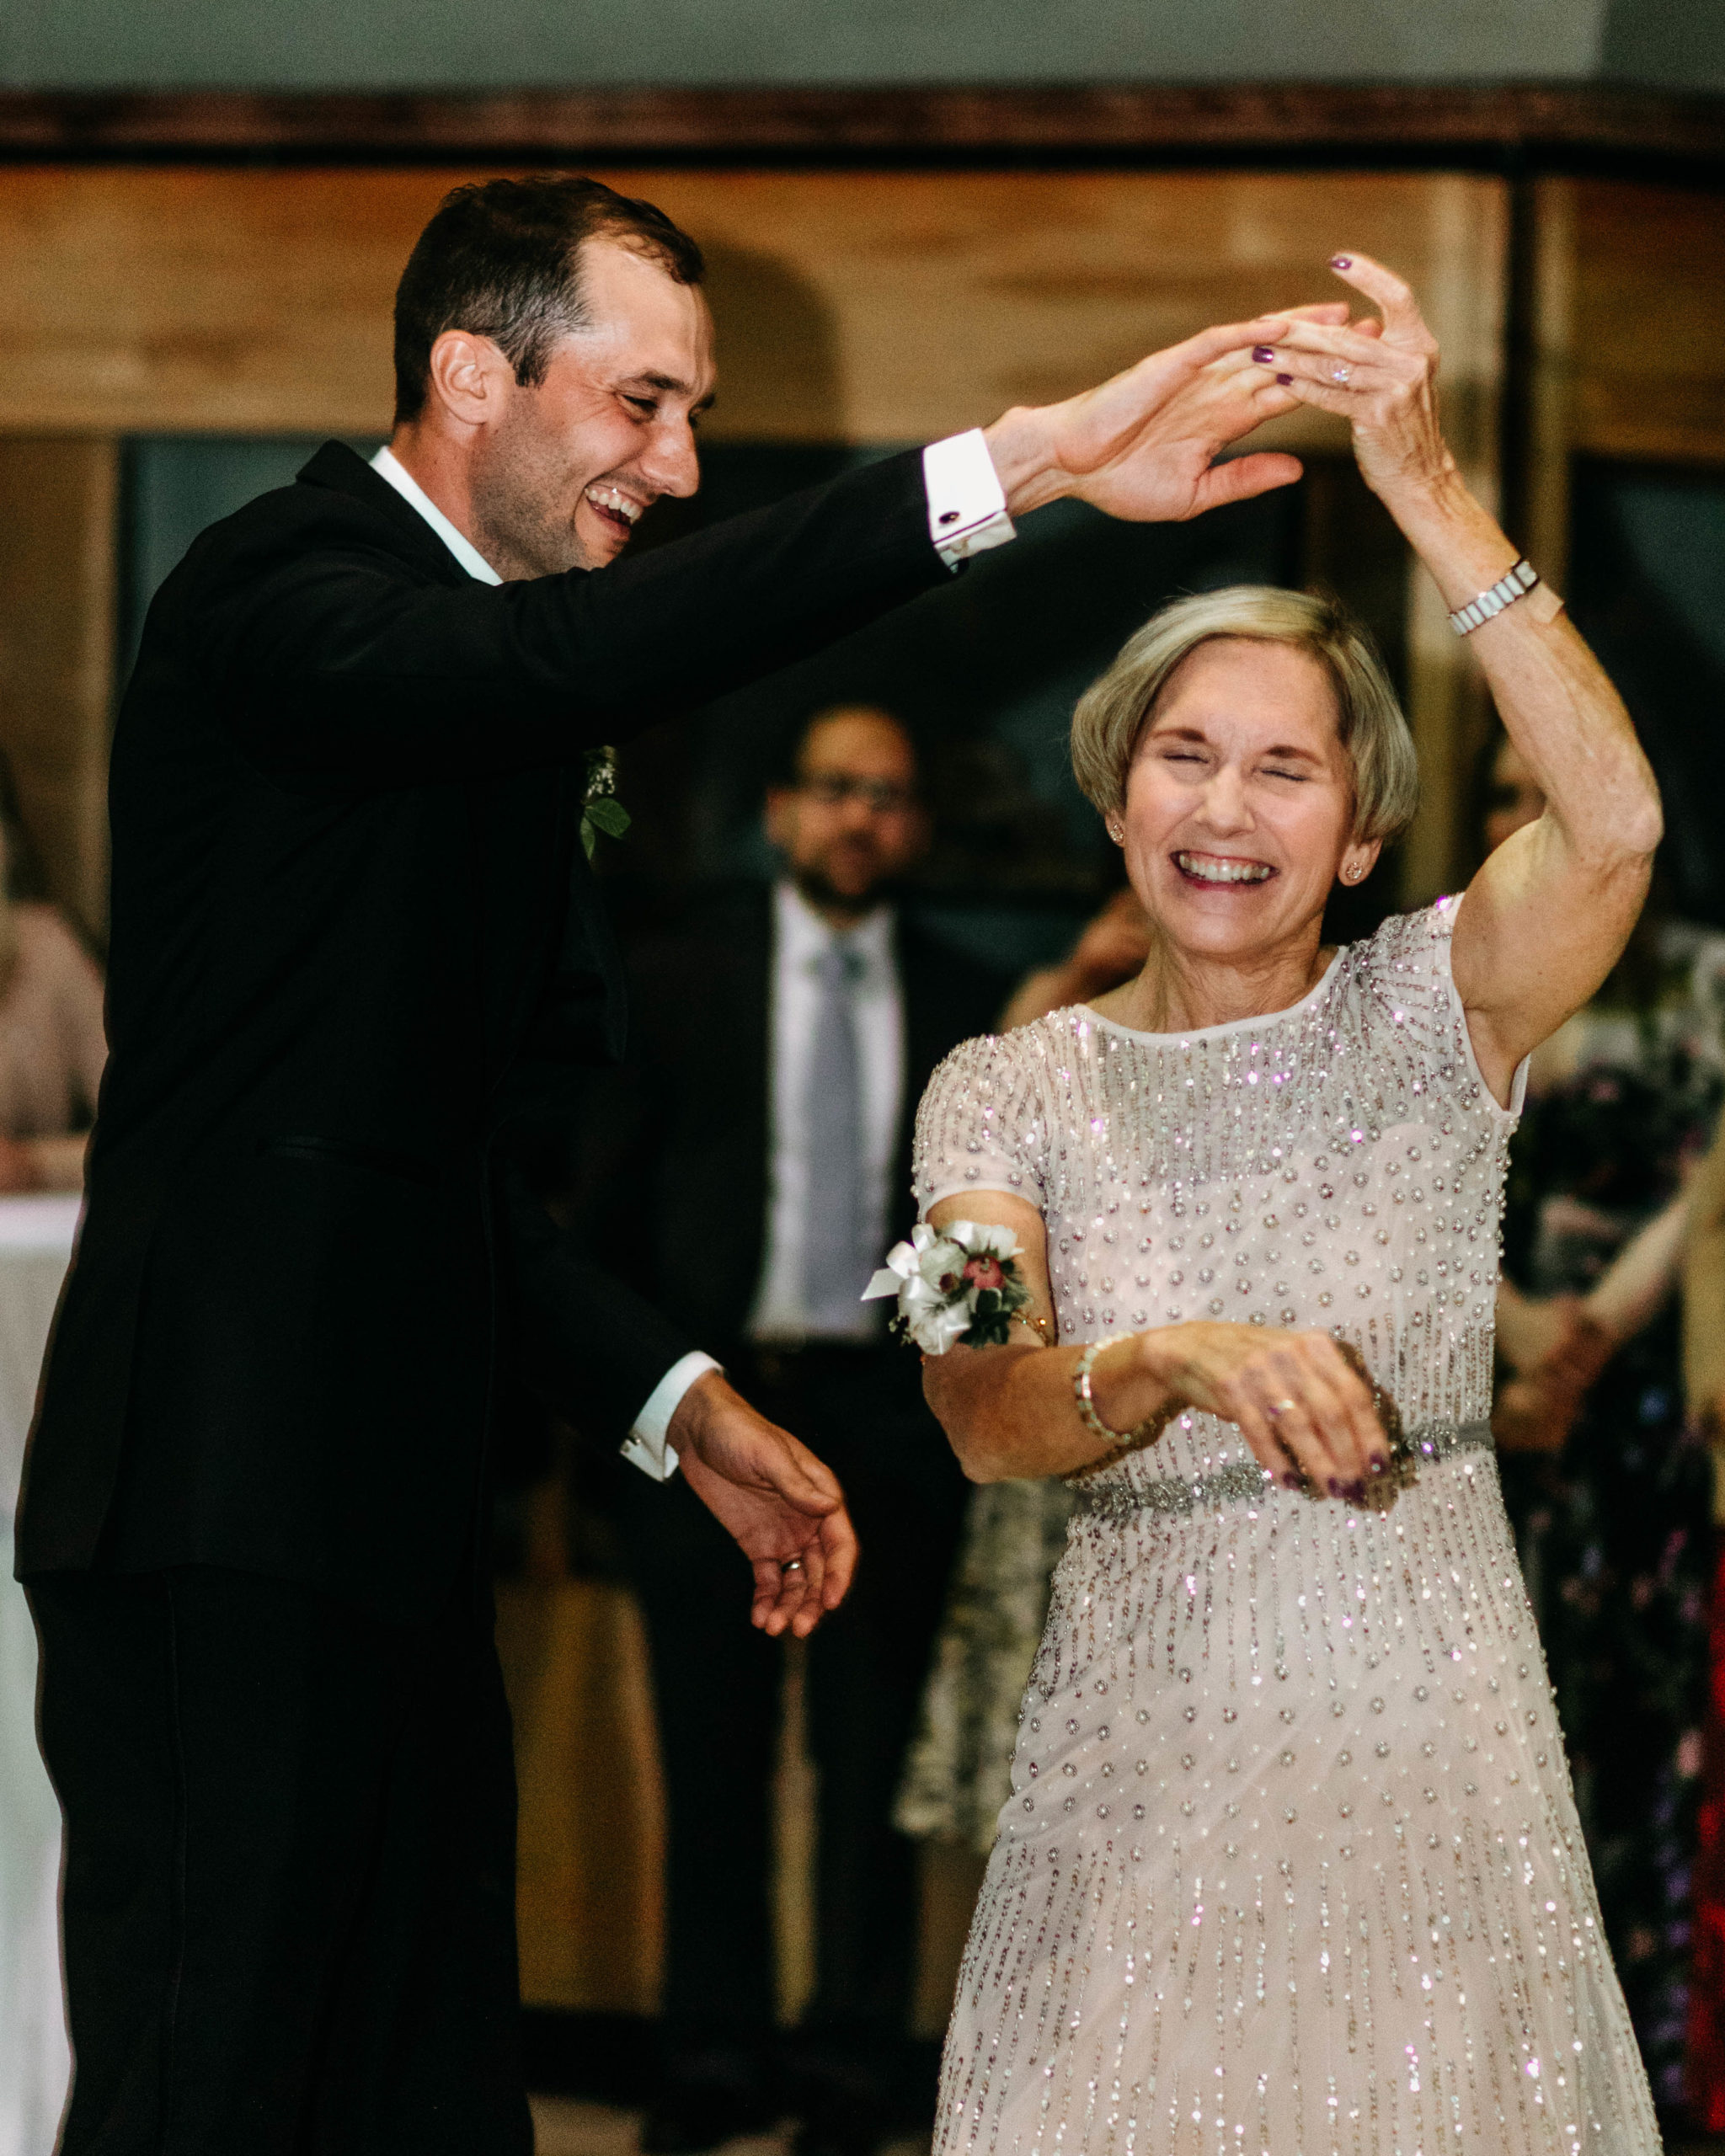 Mother and Son dancing the night away at Krohn Conservatory Wedding